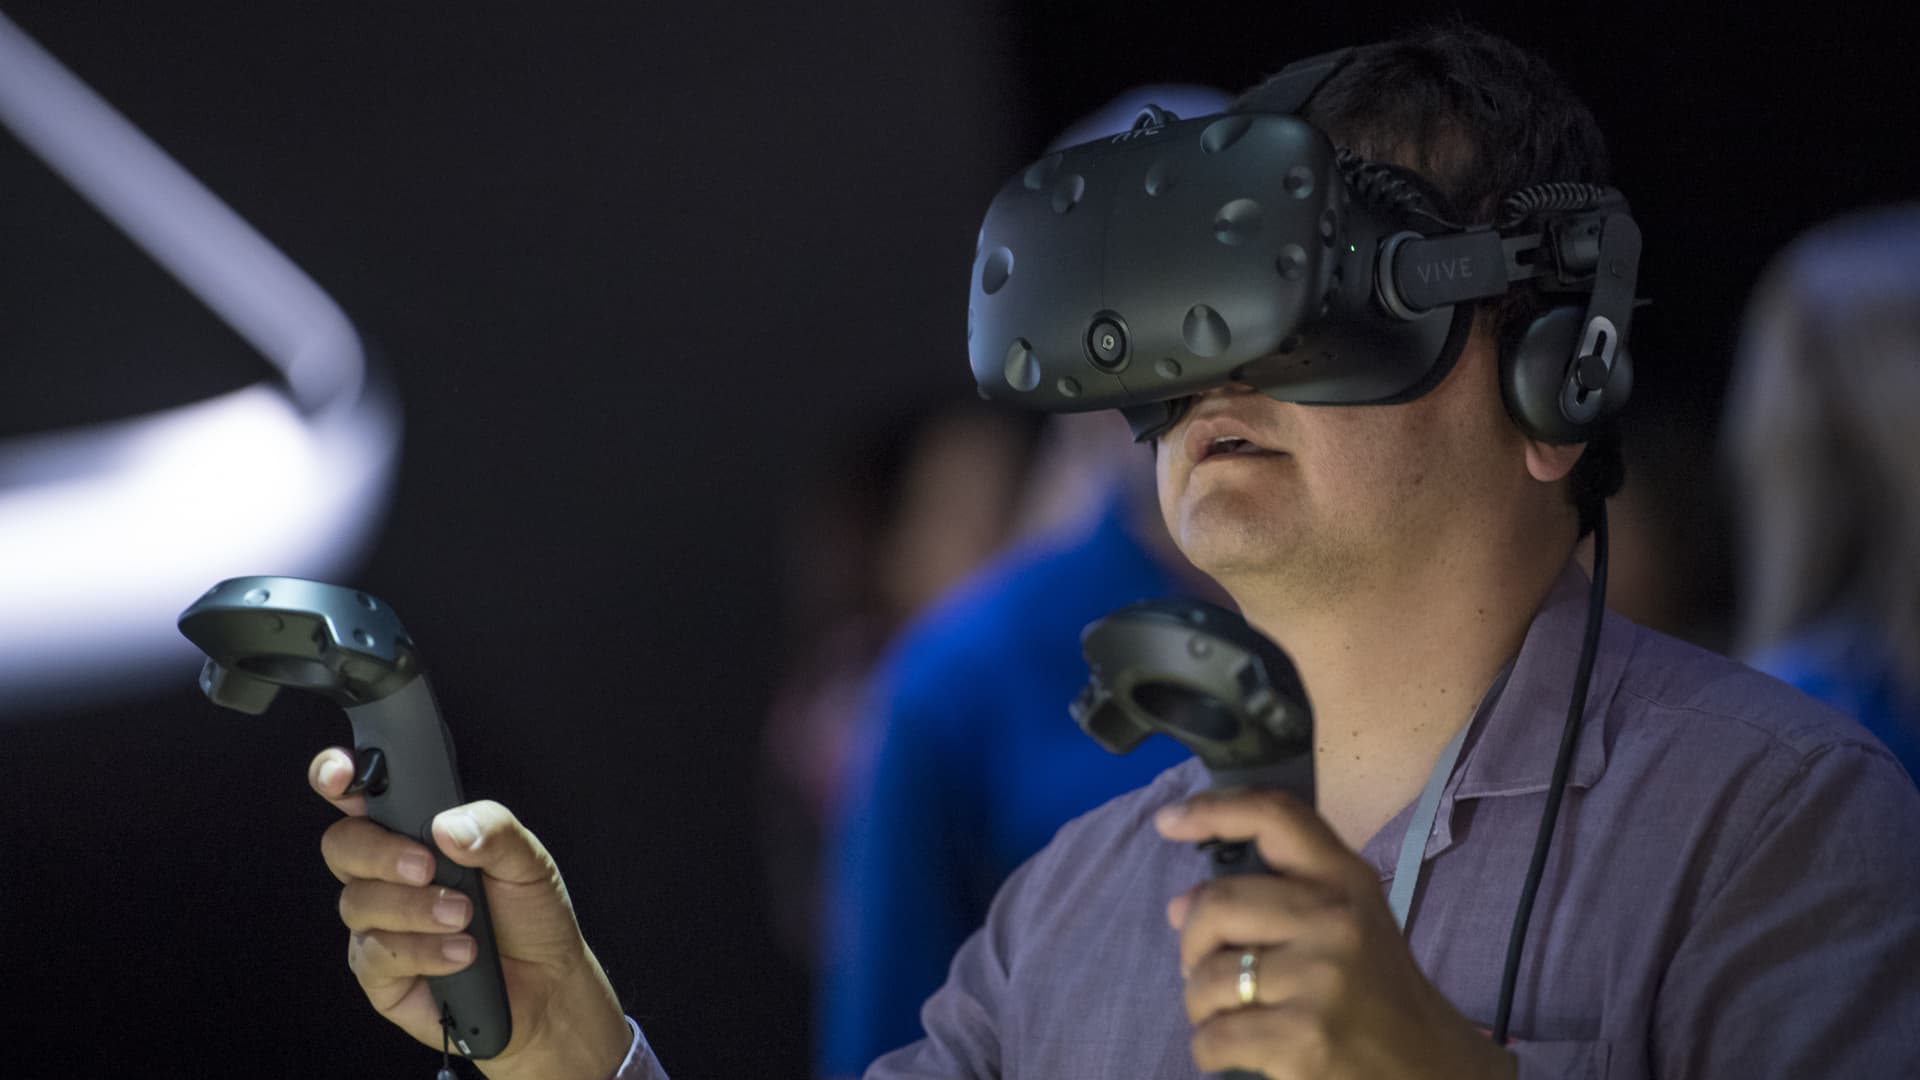 An attendee wears an HTC Vive Virtual Reality headset during the Apple Worldwide Developers Conference in San Jose, California, June 5, 2017.